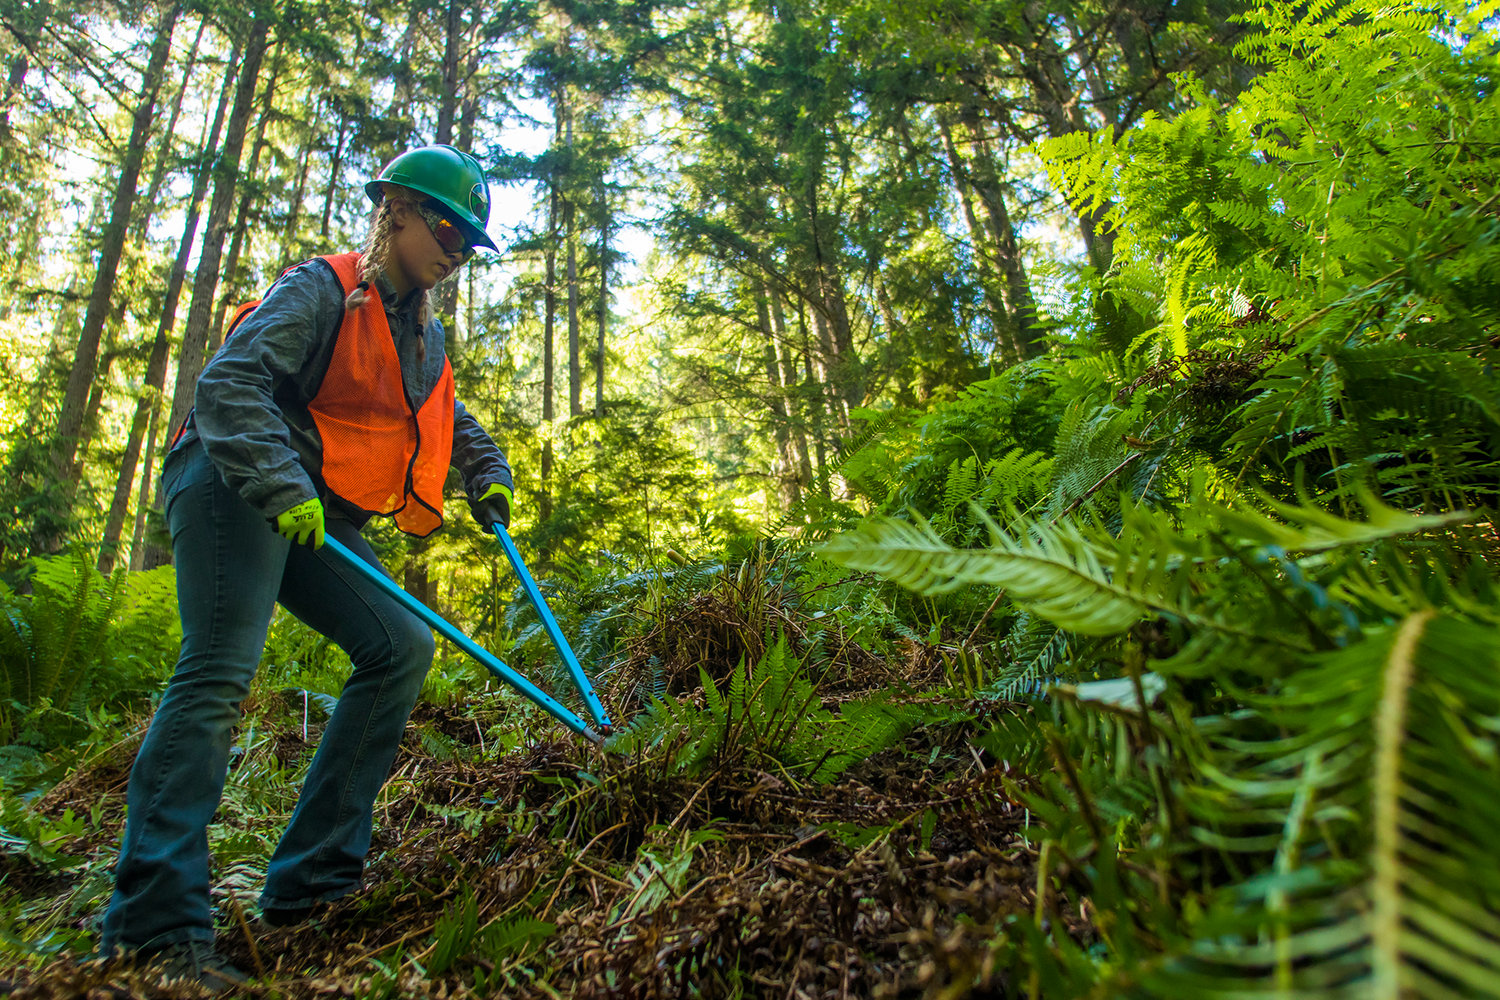 Jaiden Linder, a sophomore at White Pass High School, uses a pair of branch trimmers off of Forest Road 77 Wednesday afternoon in the Gifford Pinchot National Forest.